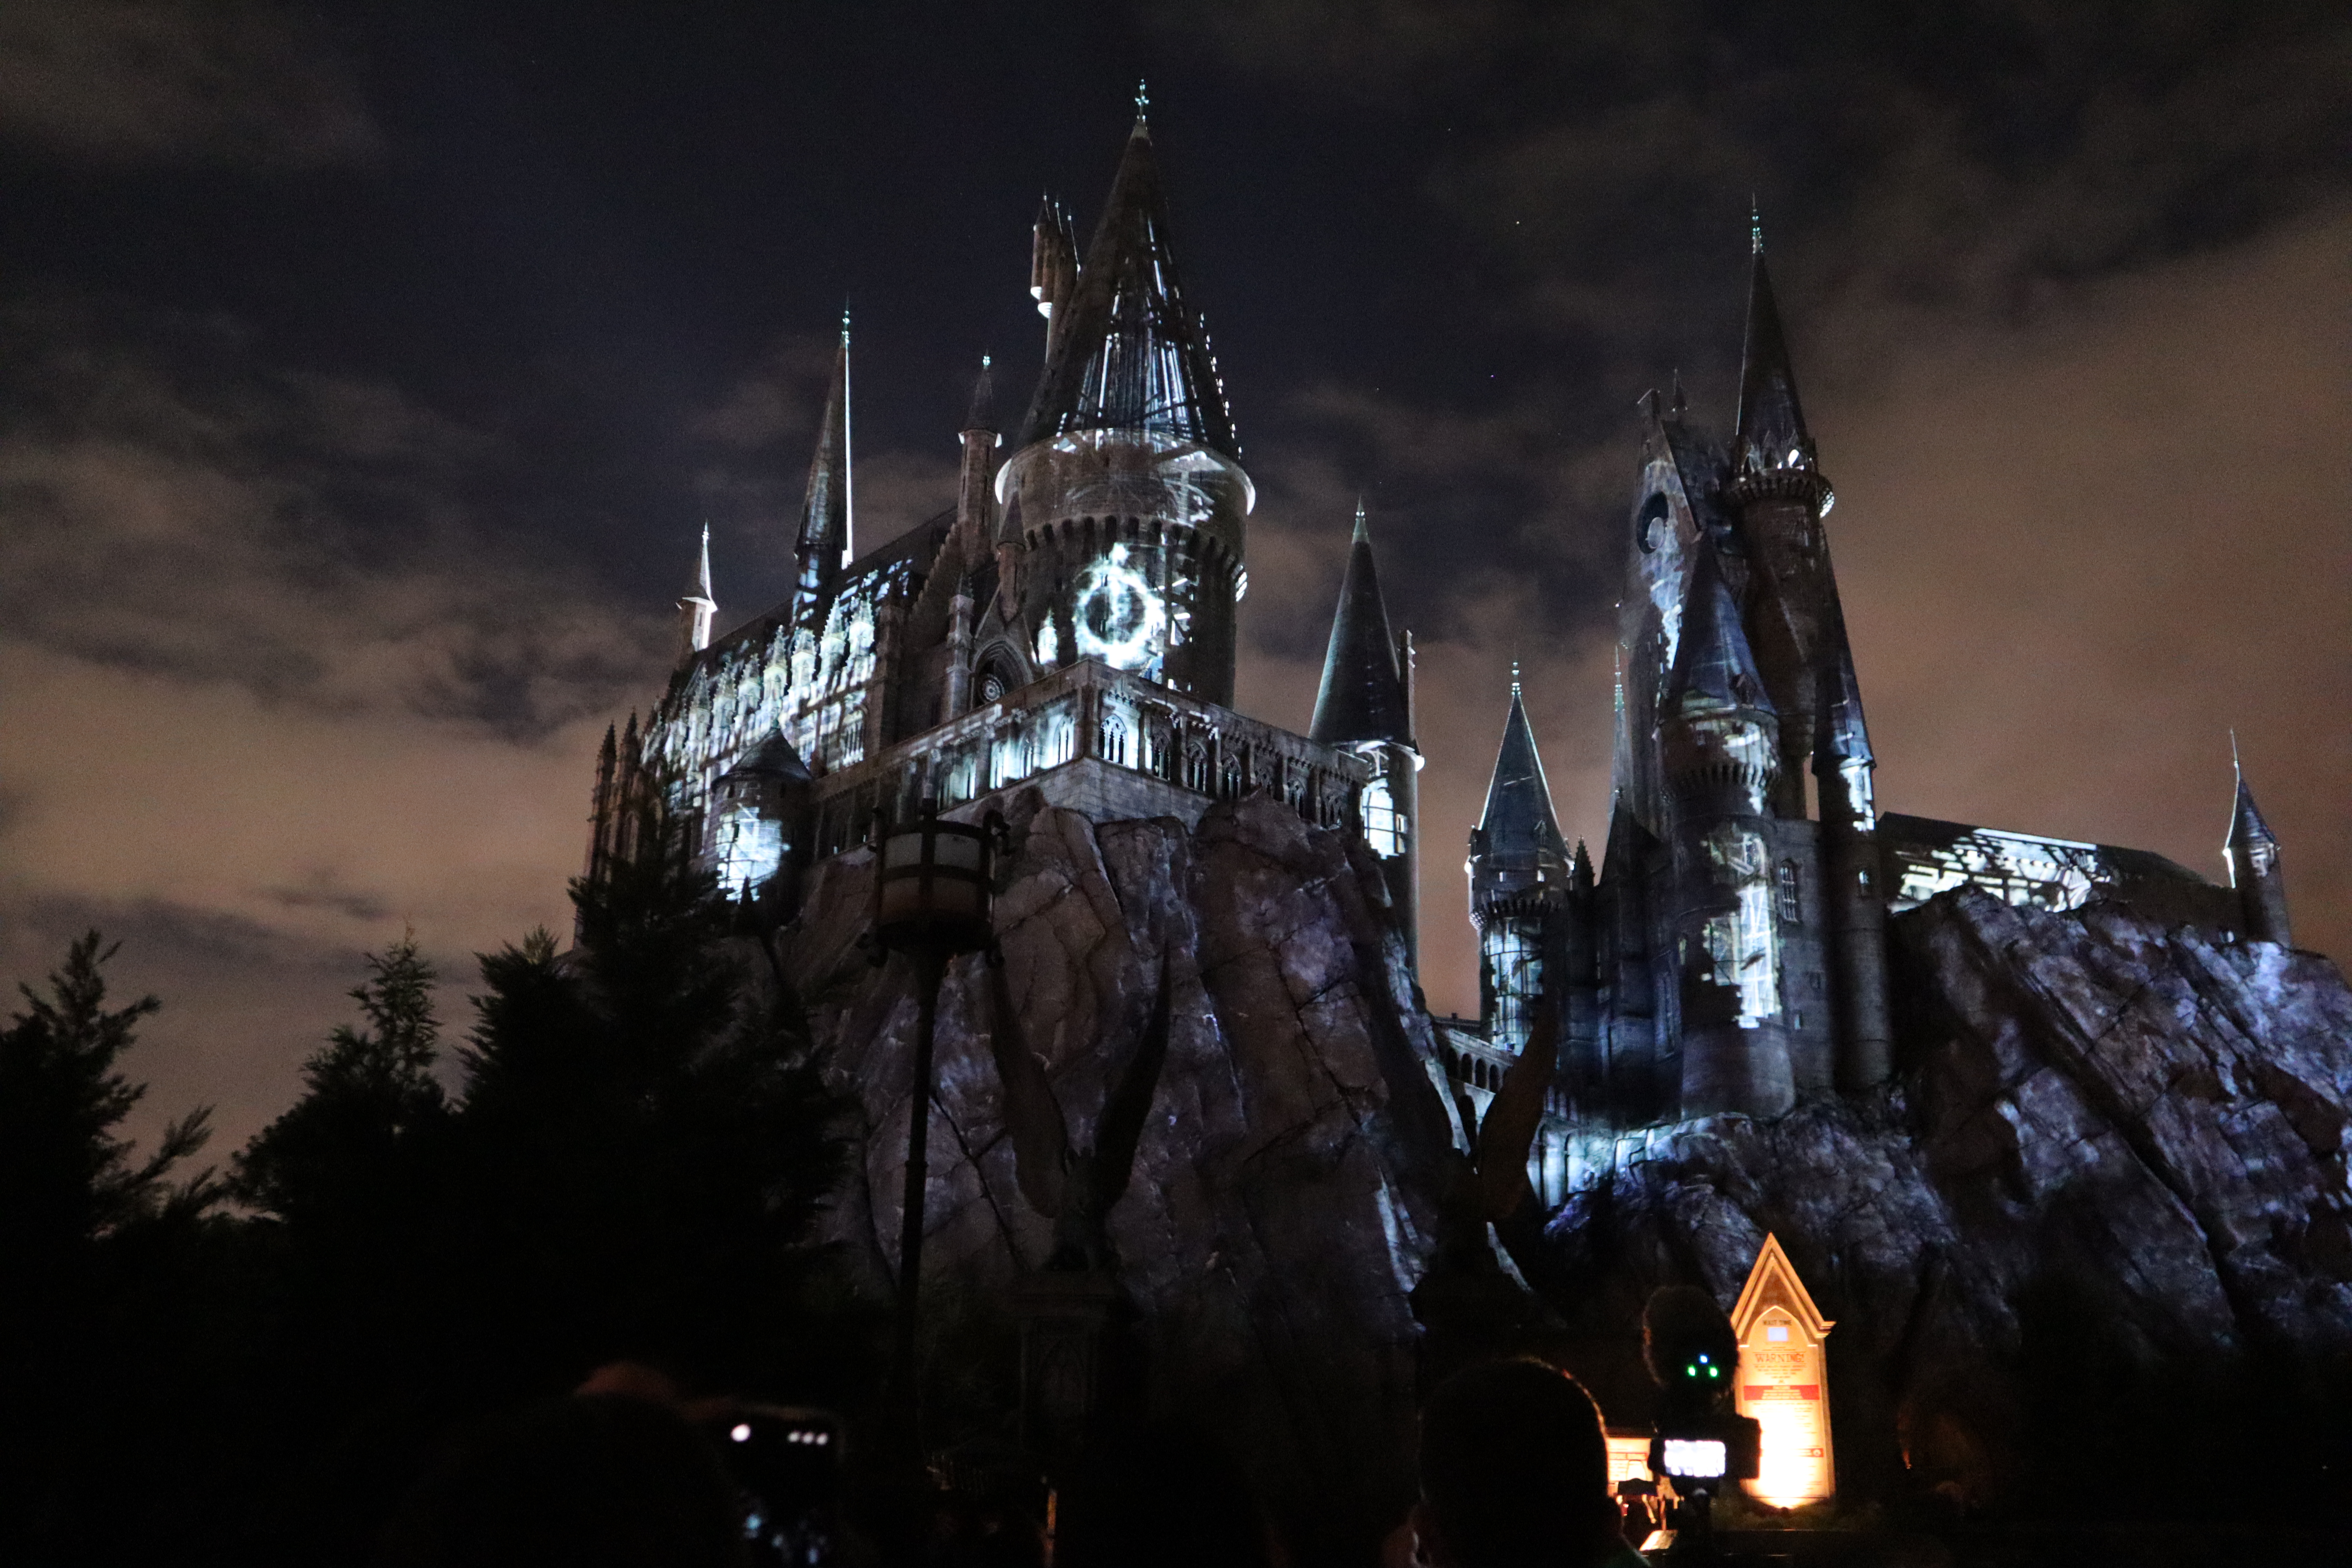 The Deathly Hallows symbol is projected onto the castle.